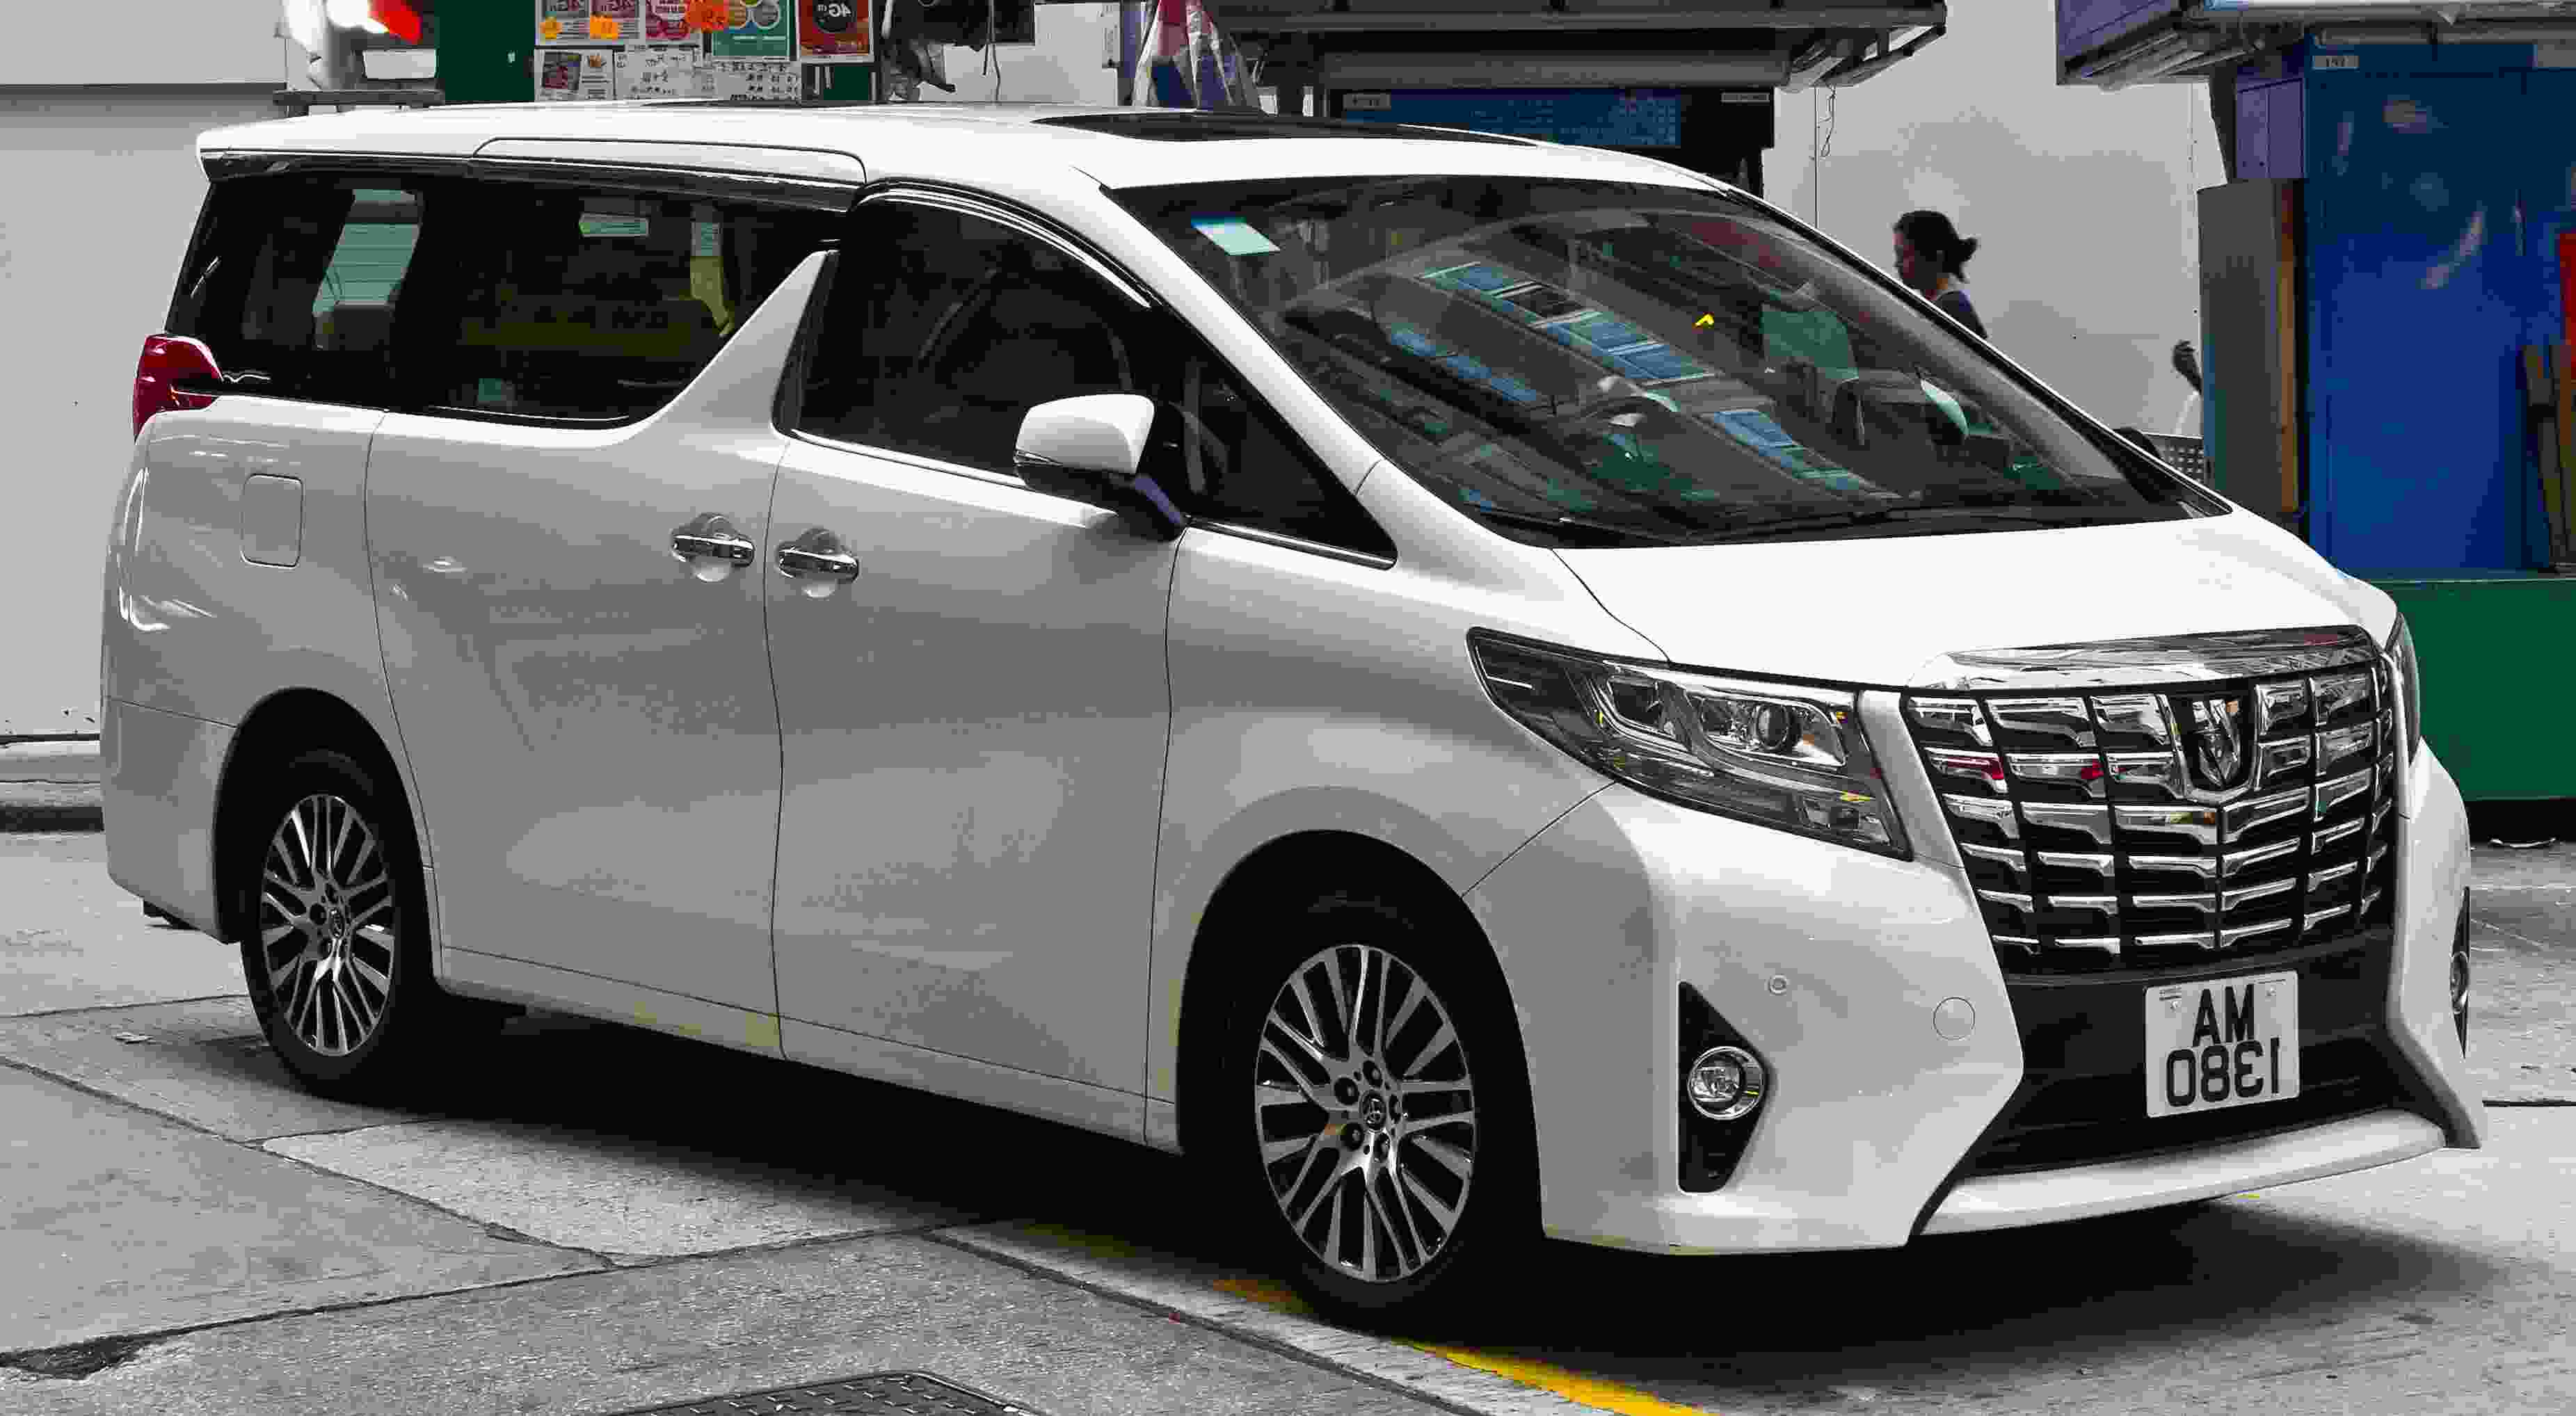 Toyota Alphard for sale in UK 83 used Toyota Alphards